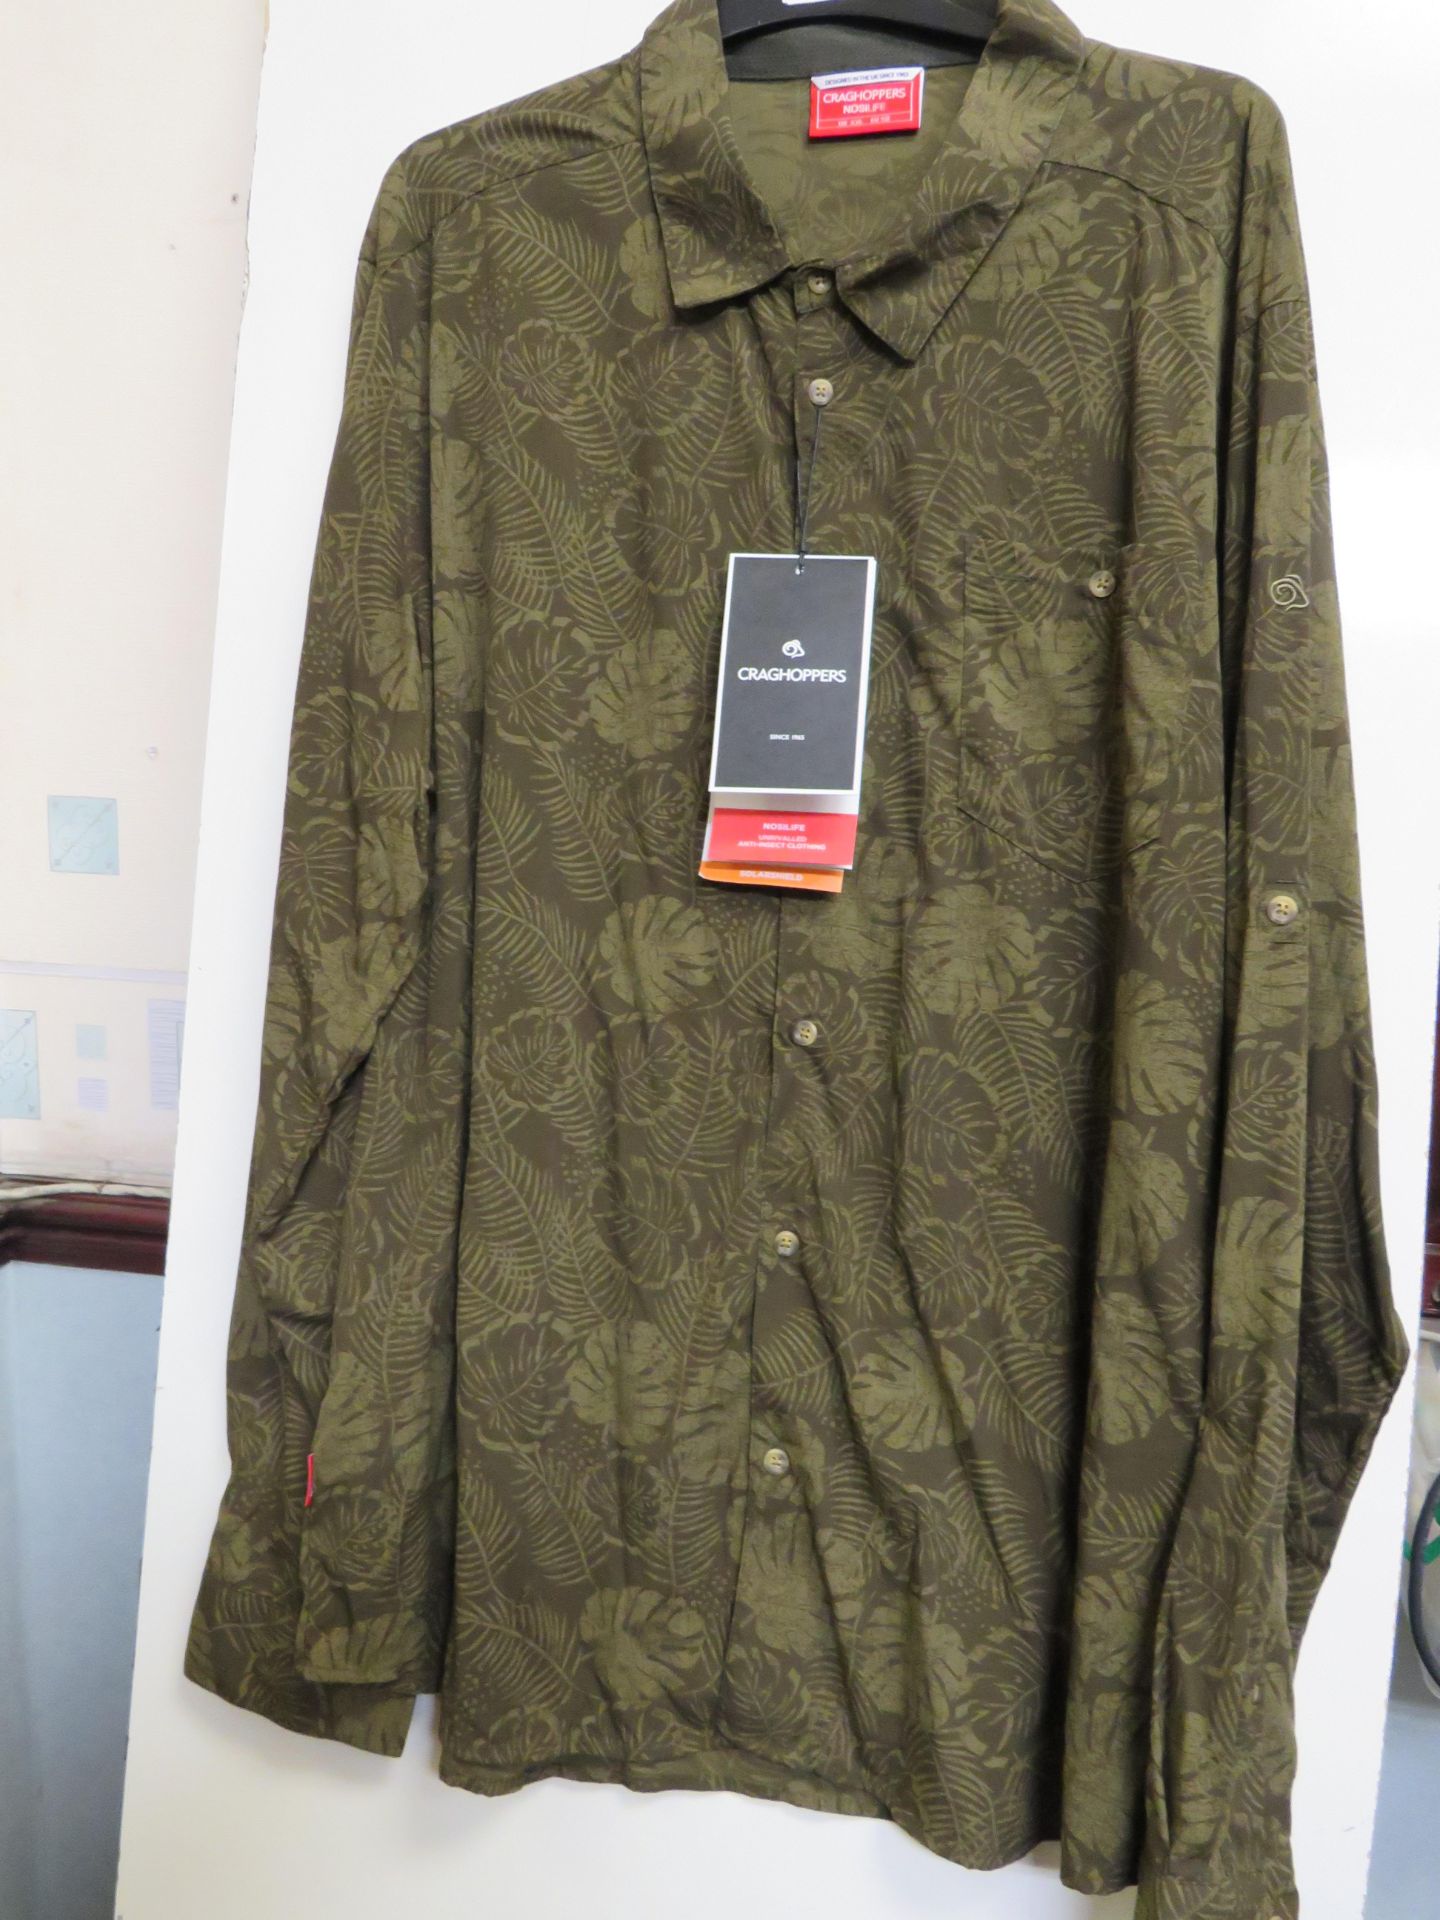 Craghopper Nosilife Lester woodland Print Shirt with with anti insect treatment built into the